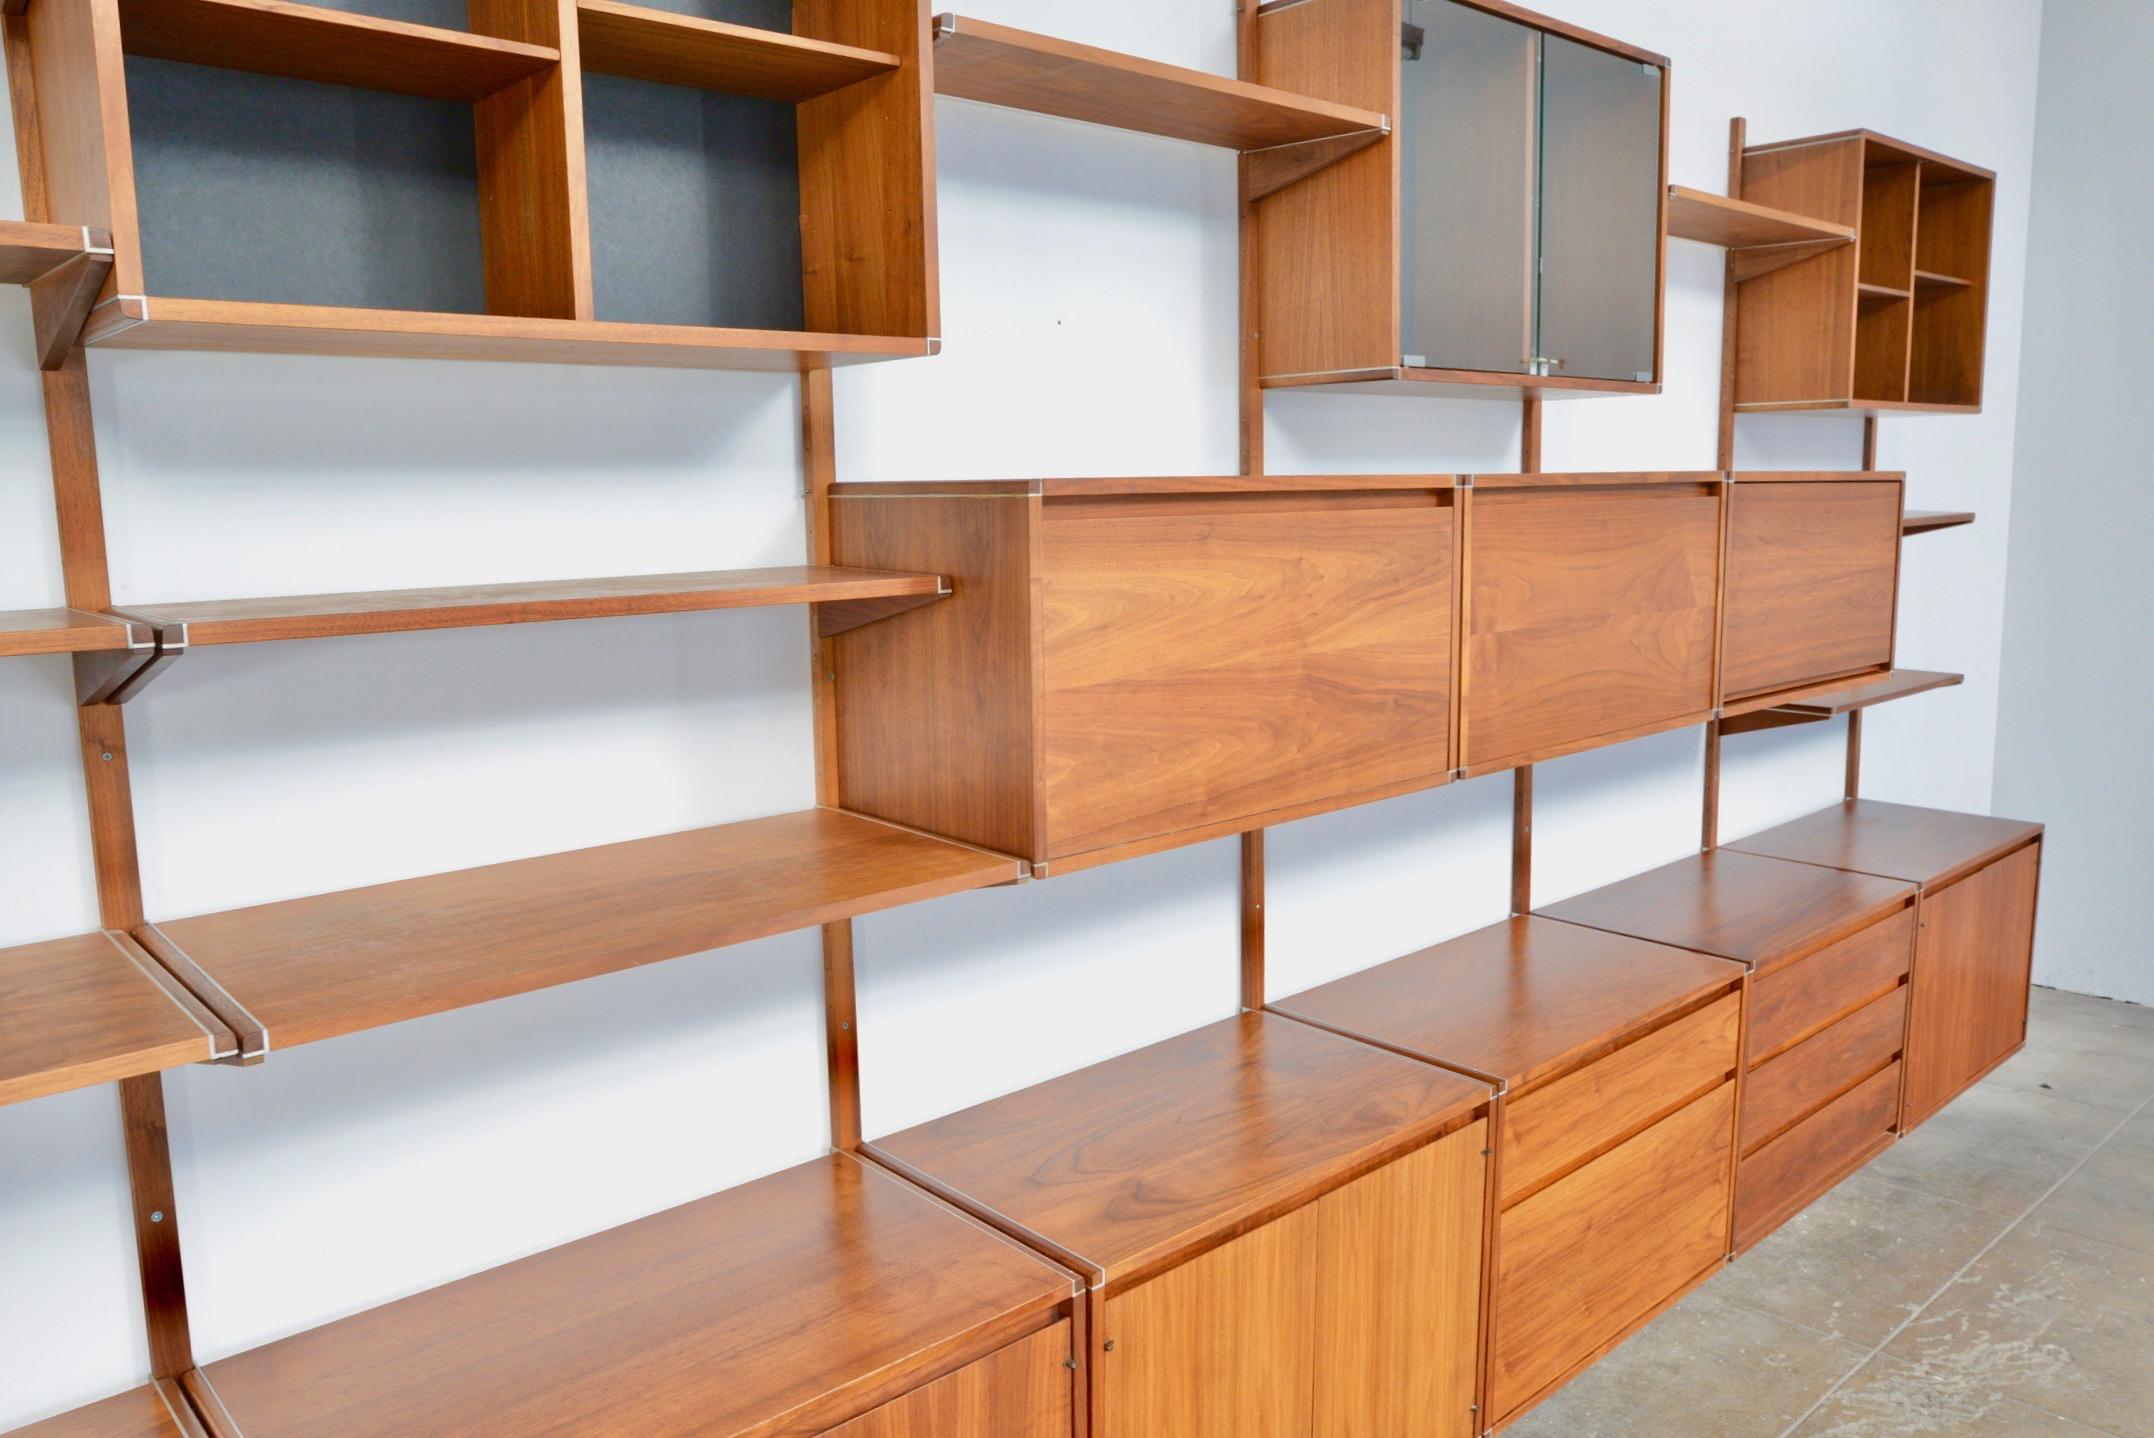 Aluminum Gerald McCabe Barzilay Wall Unit, Sold by Component For Sale